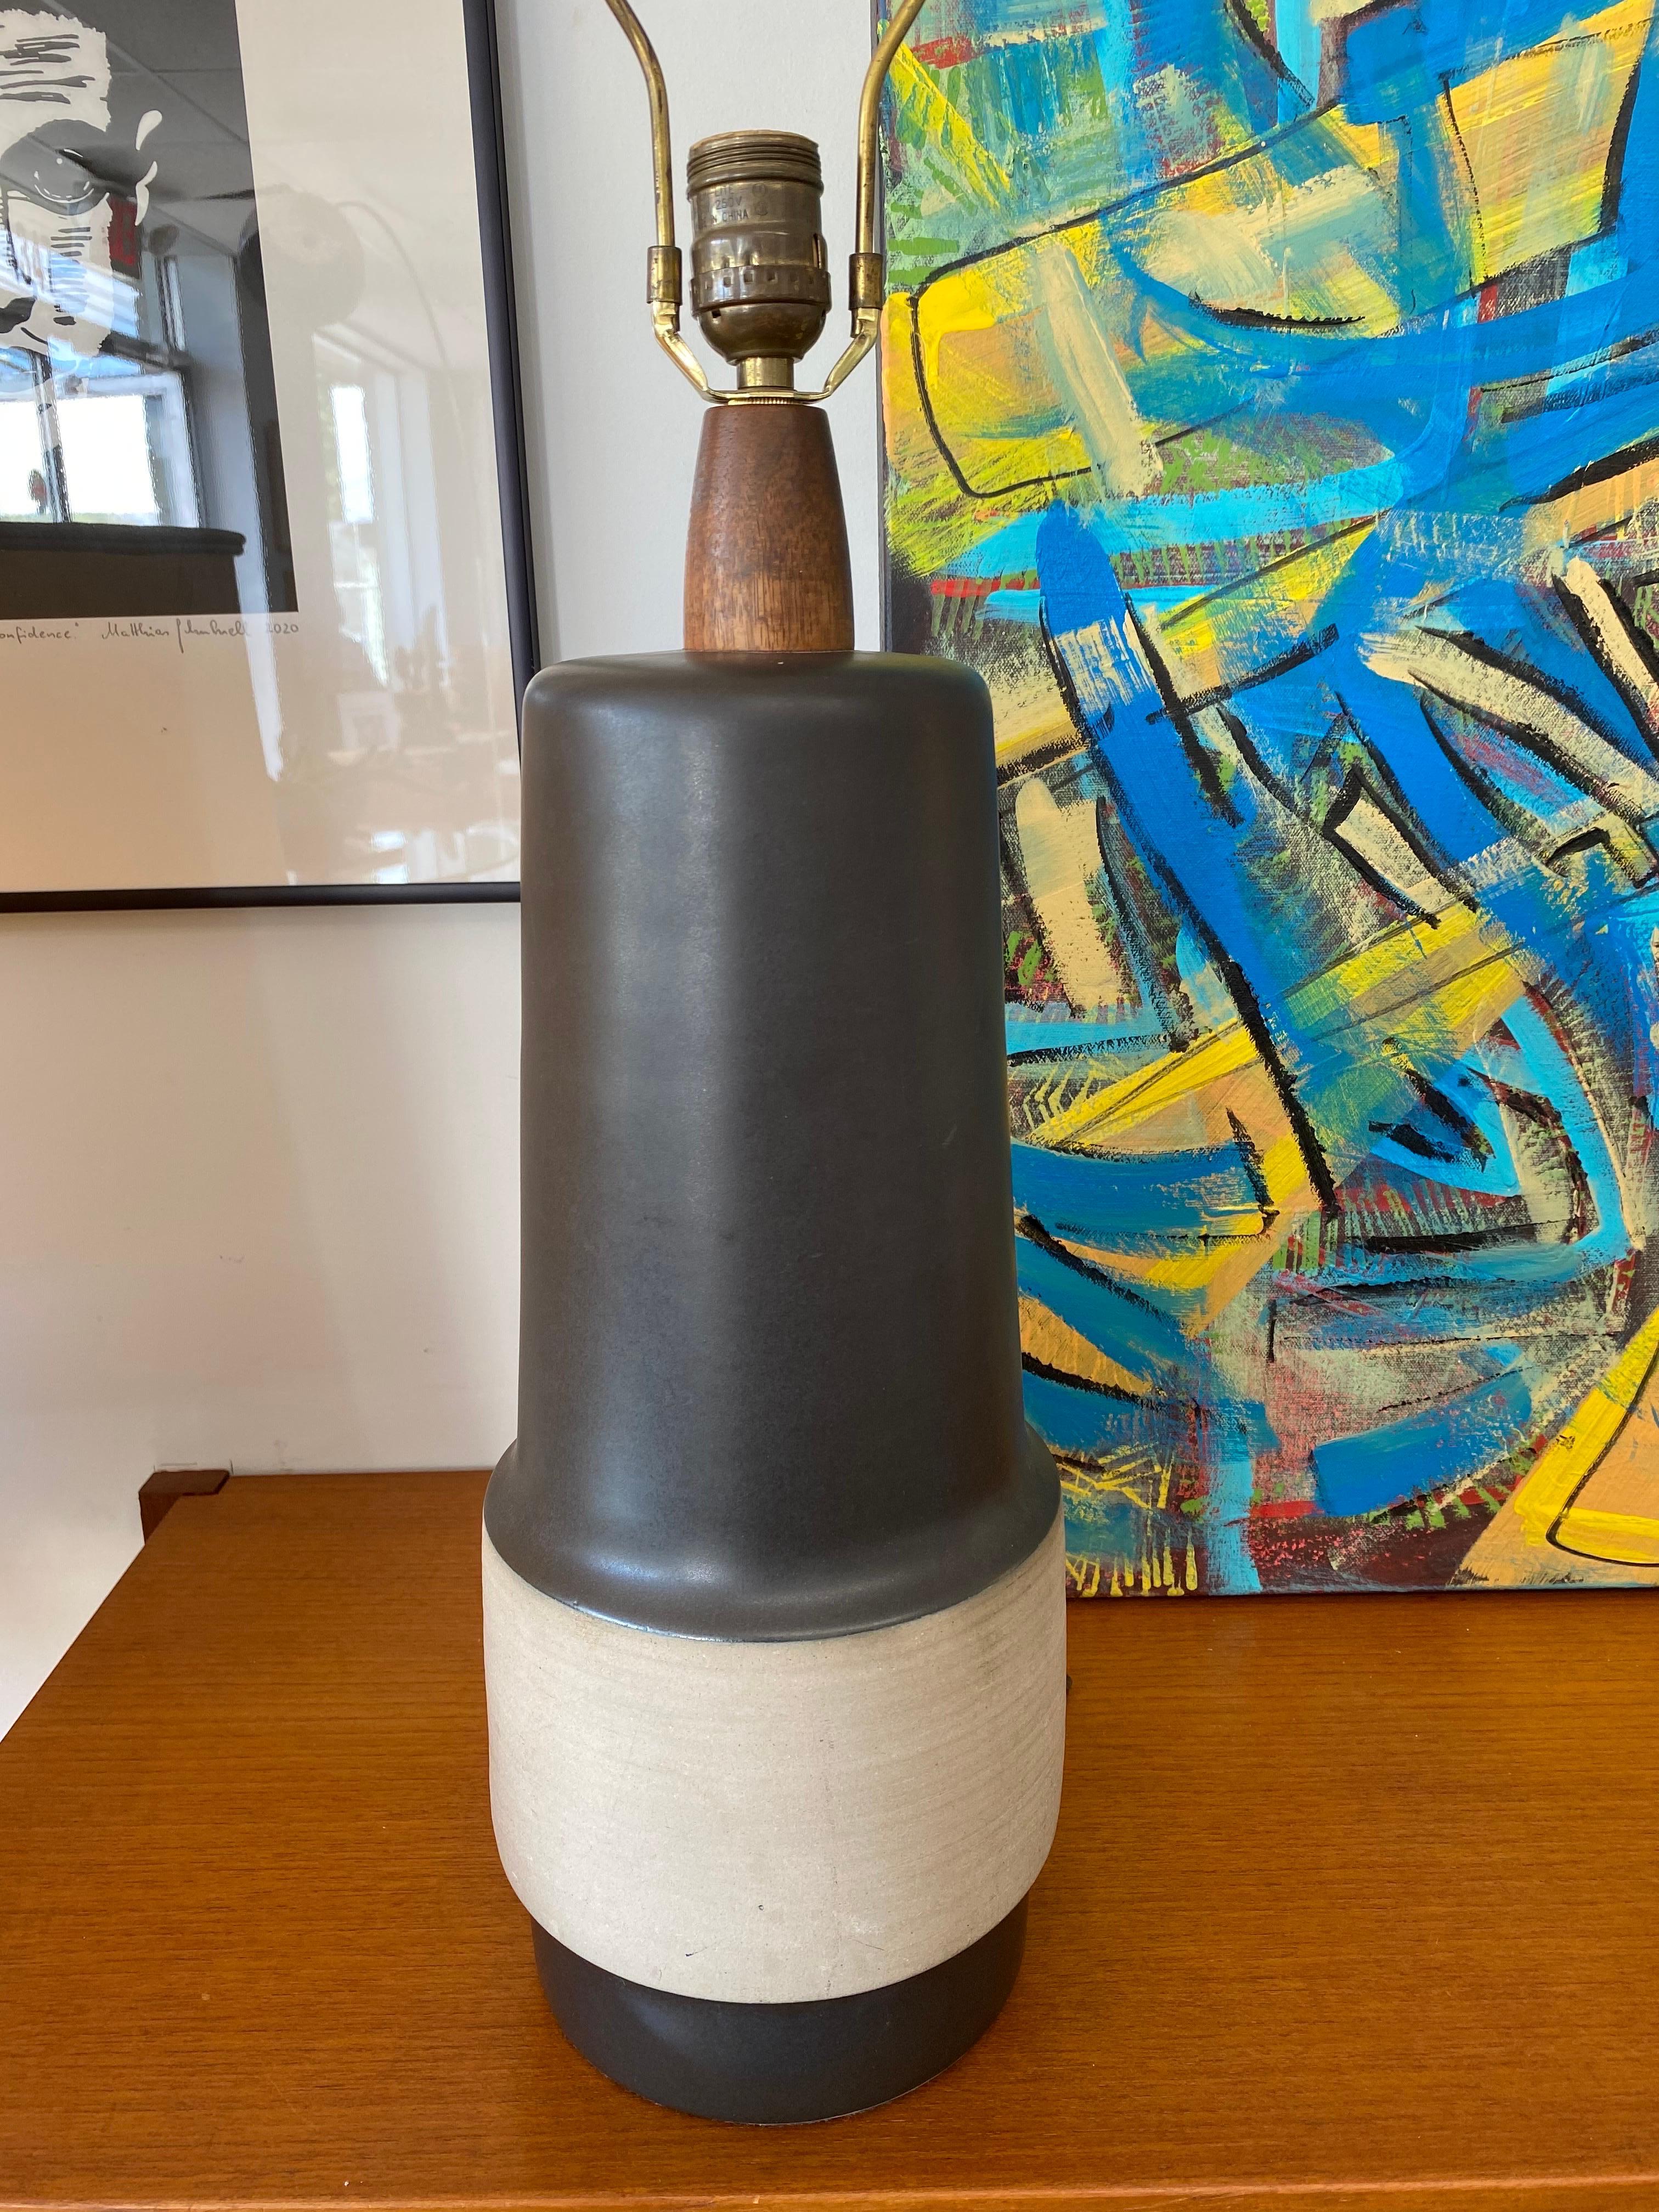 Beautifully understated ceramic lamp by Gordon & Jane Martz, circa 1960s.The lamp has a teak mounting and finial and the lampshade is new. Martz lamp is signed and in great condition. 

Gordon & Jane Martz were among the premier American designers